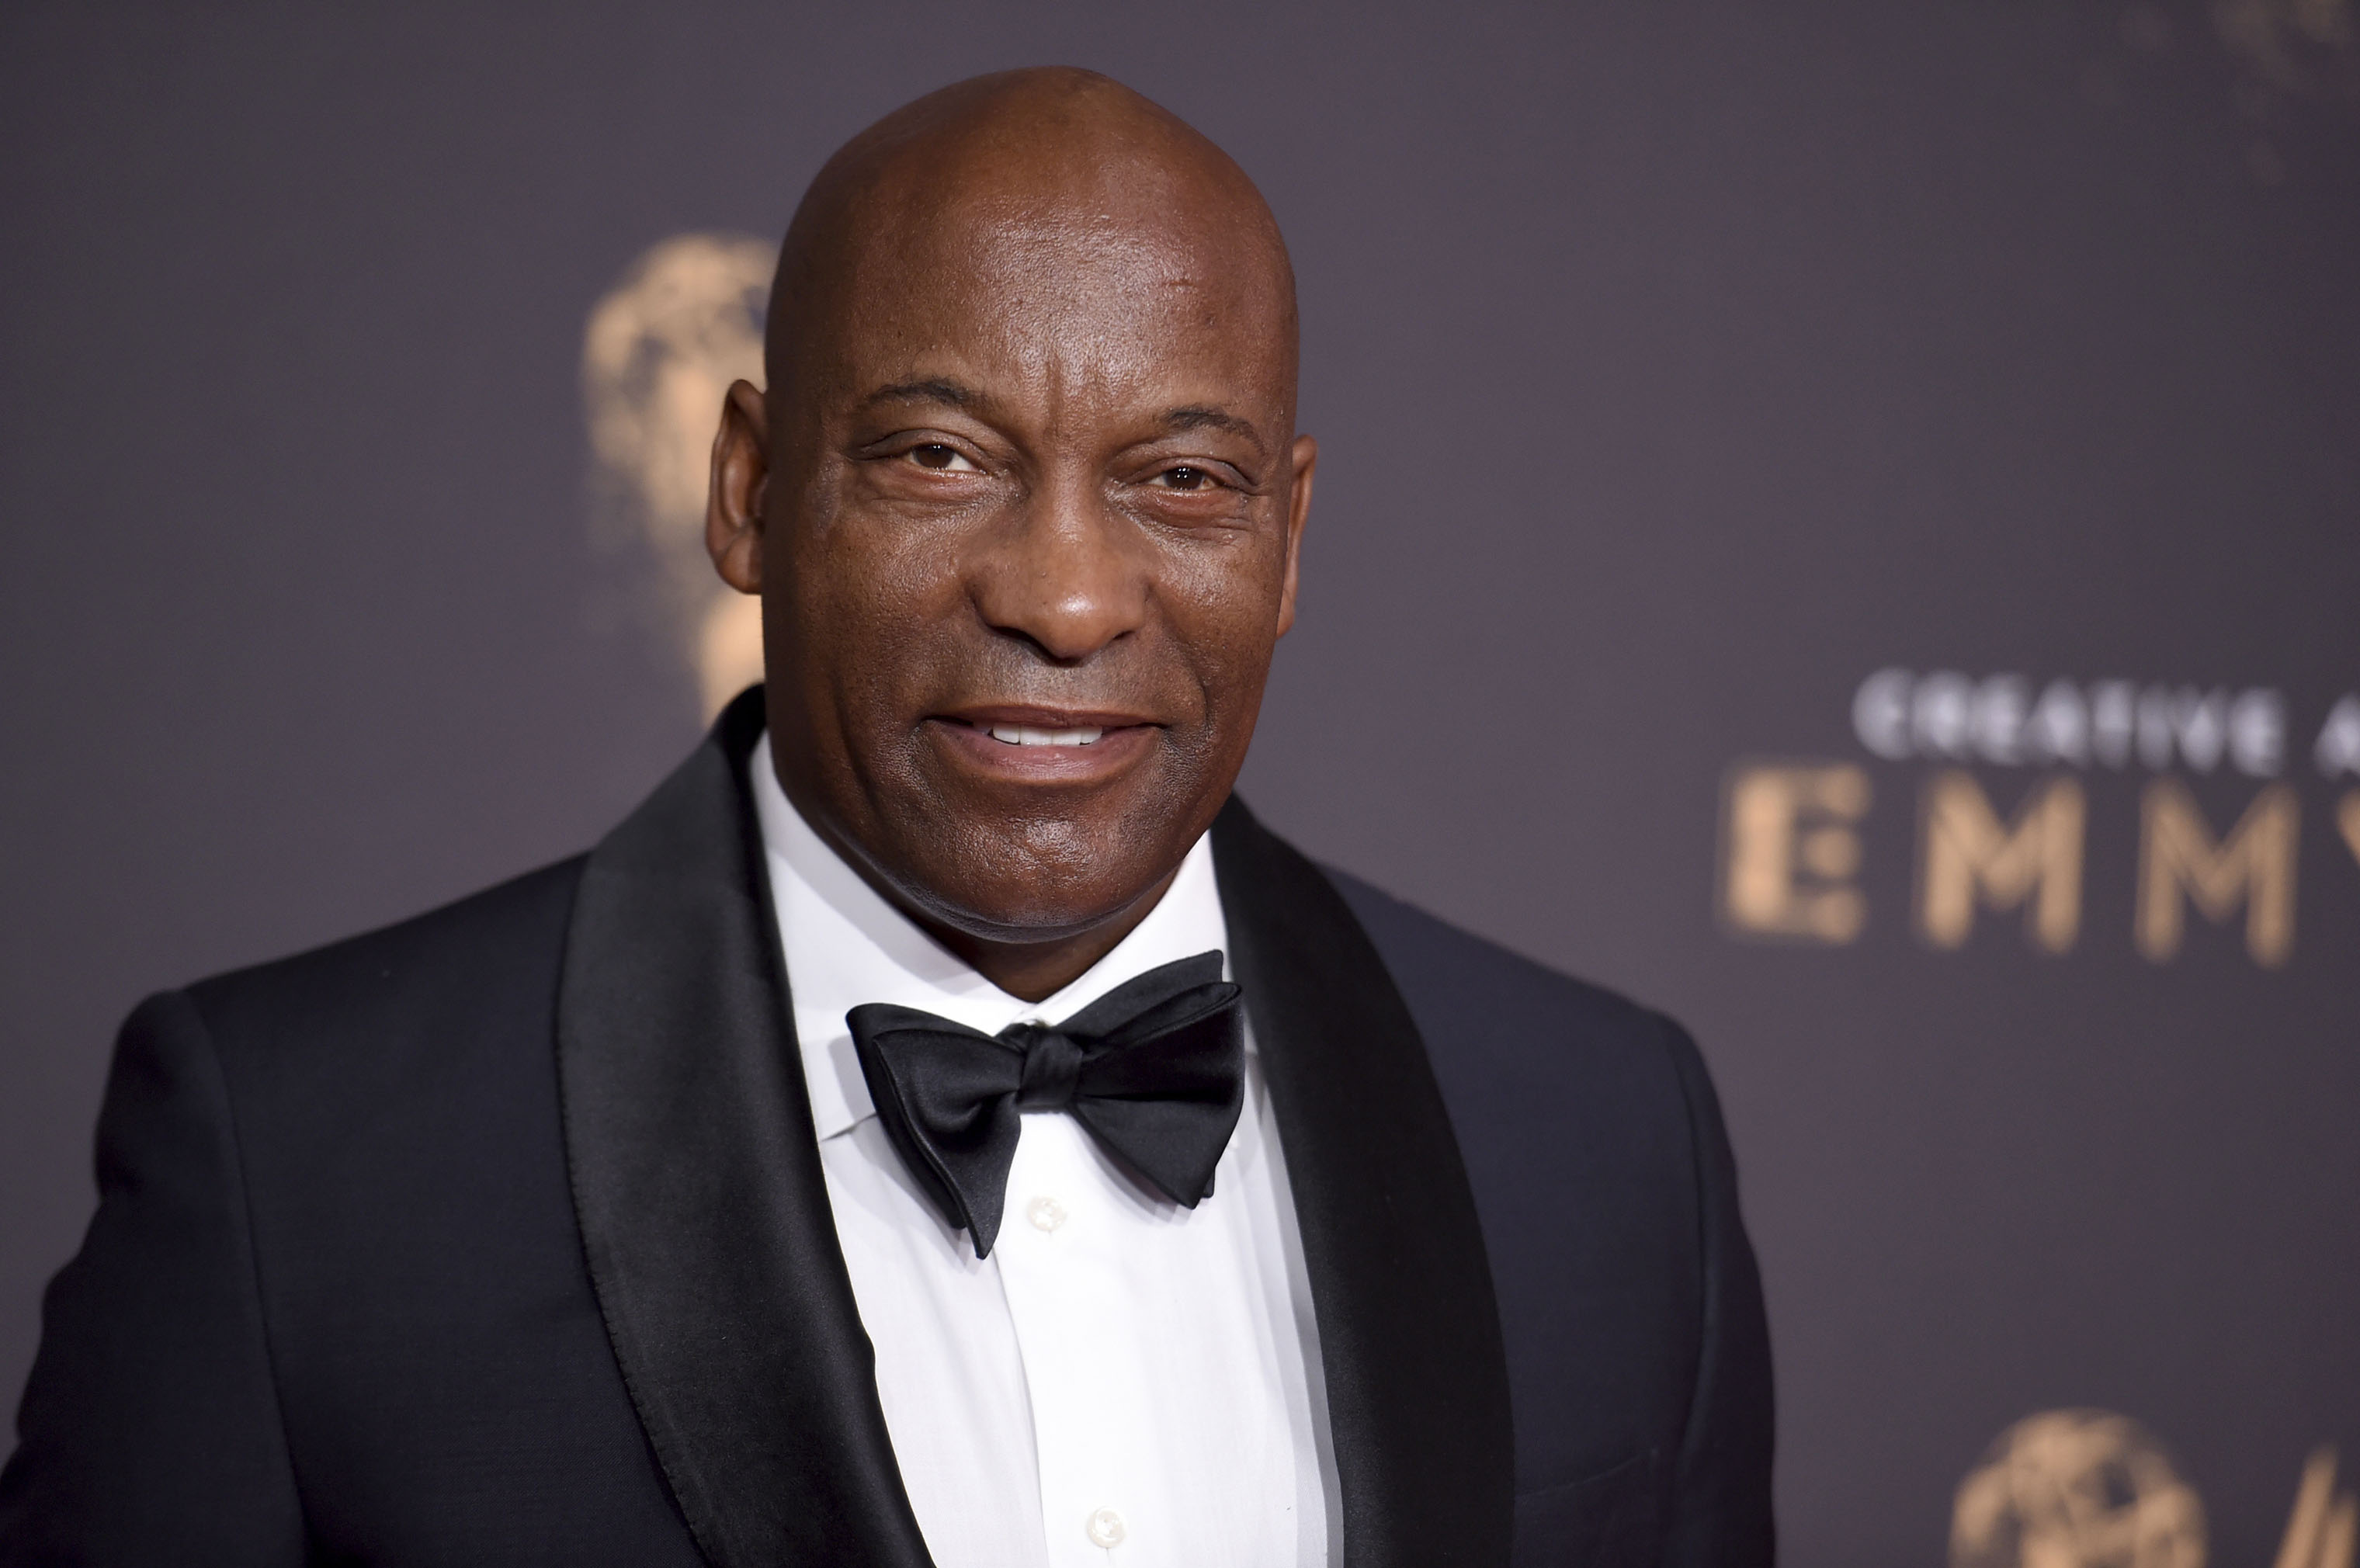 John Singleton arrives at night one of the Creative Arts Emmy Awards at the Microsoft Theater on Saturday, Sept. 9, 2017, in Los Angeles. (Richard Shotwell—Invision/AP)